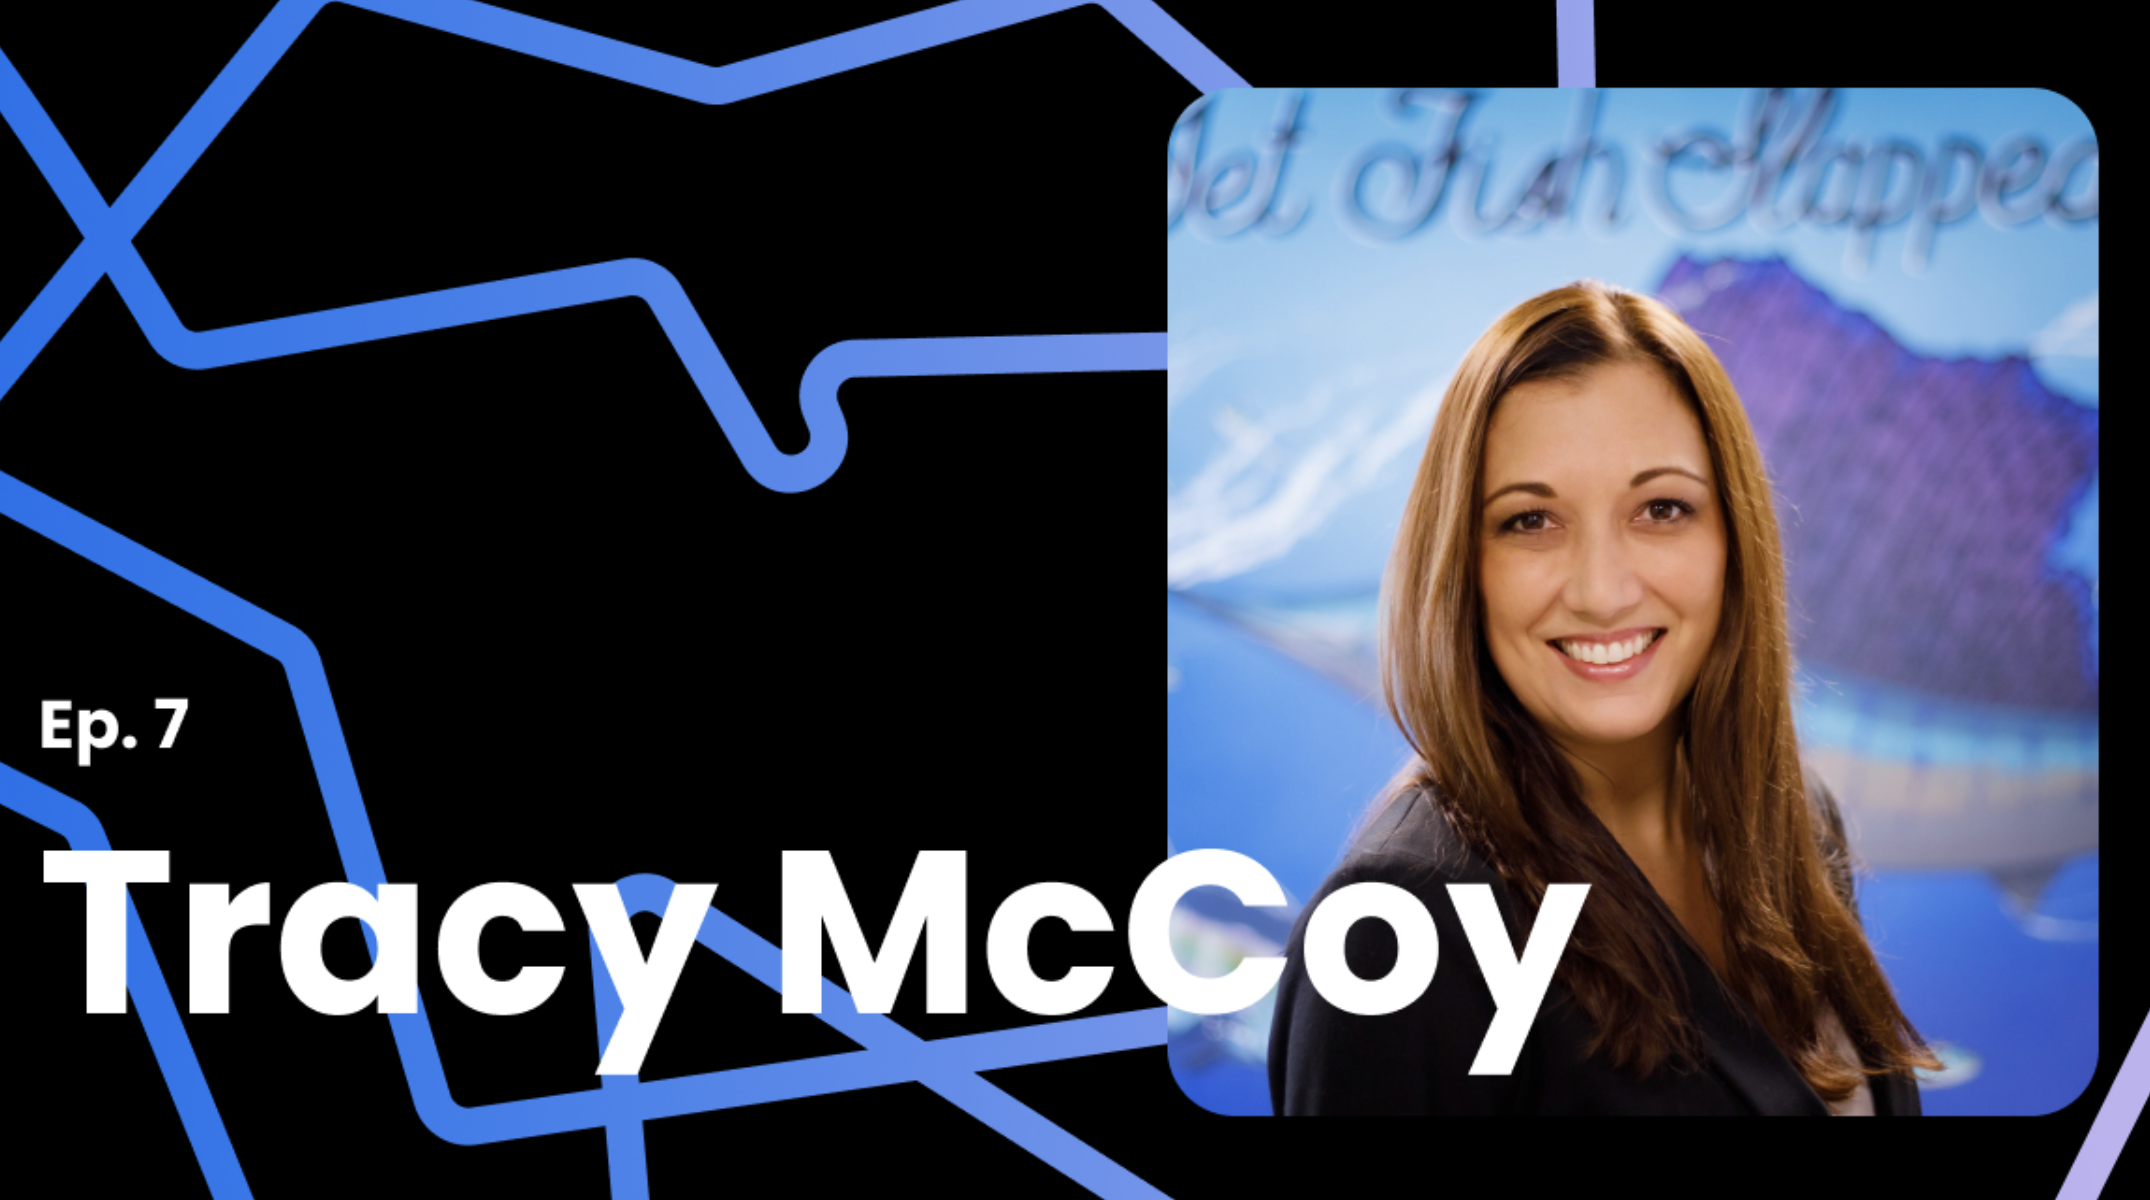 Optimize Your Facebook Strategy: An Interview with Tracy McCoy